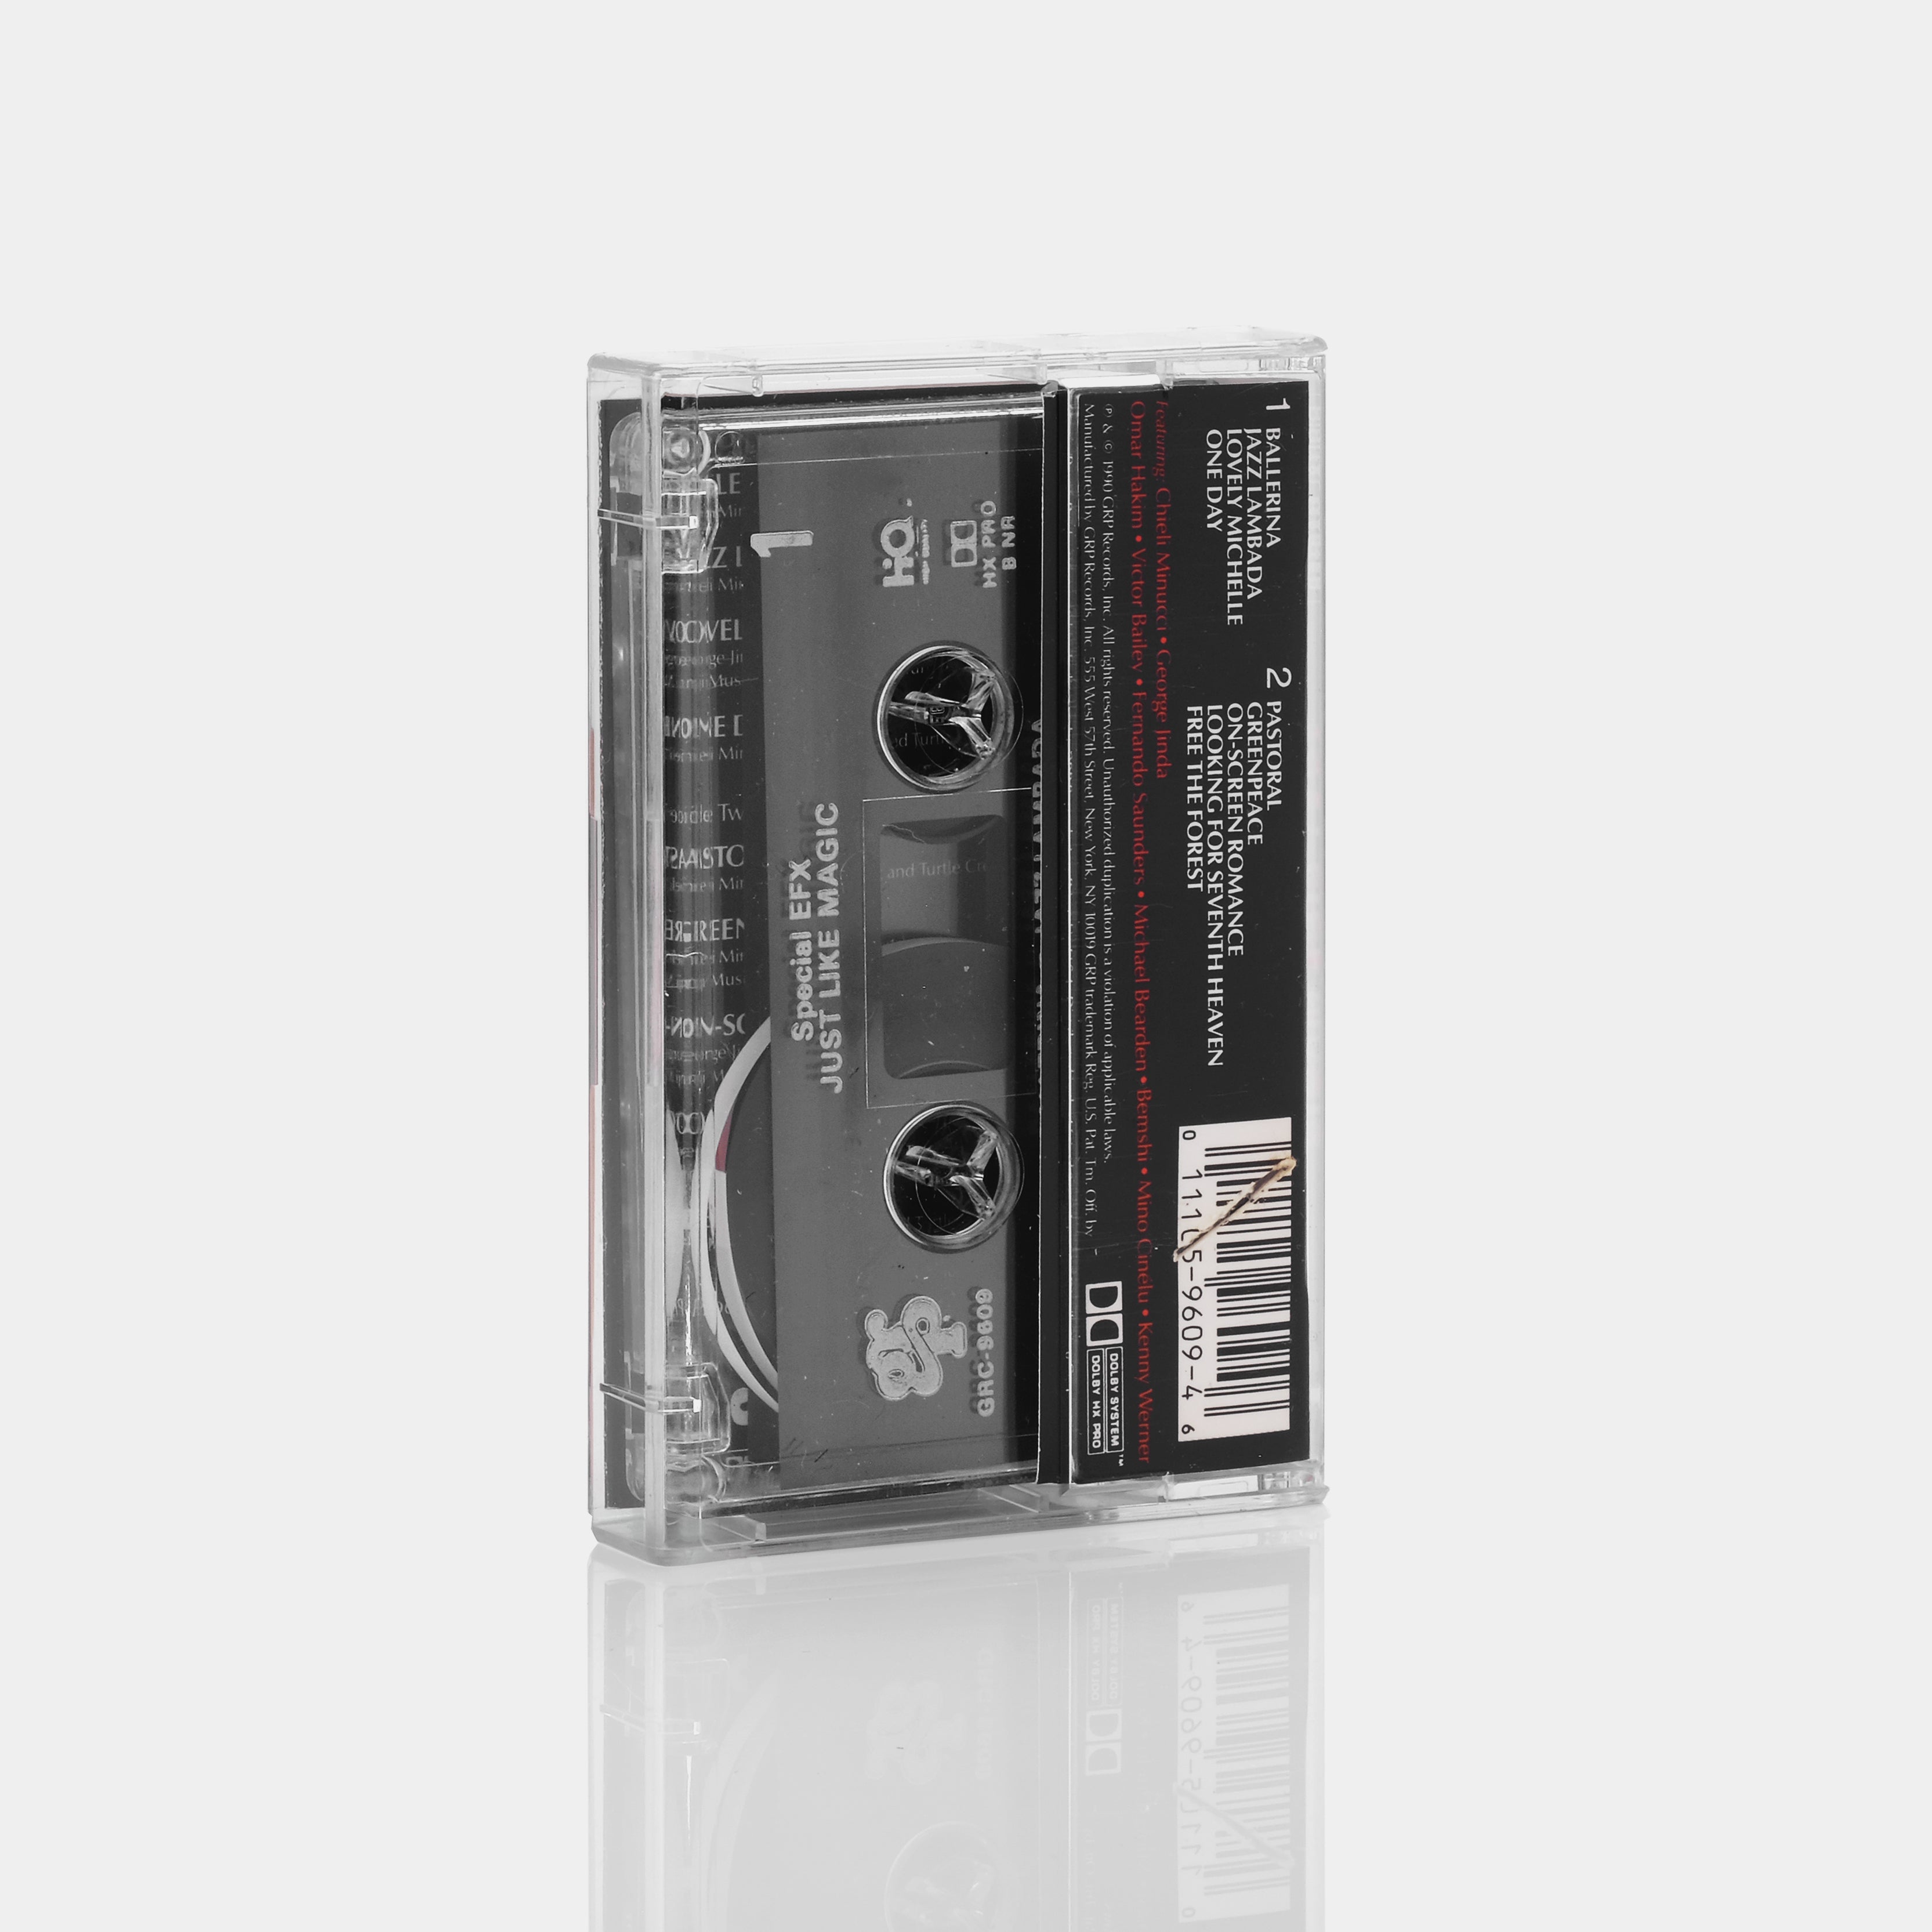 Special EFX - Just Like Magic Cassette Tape